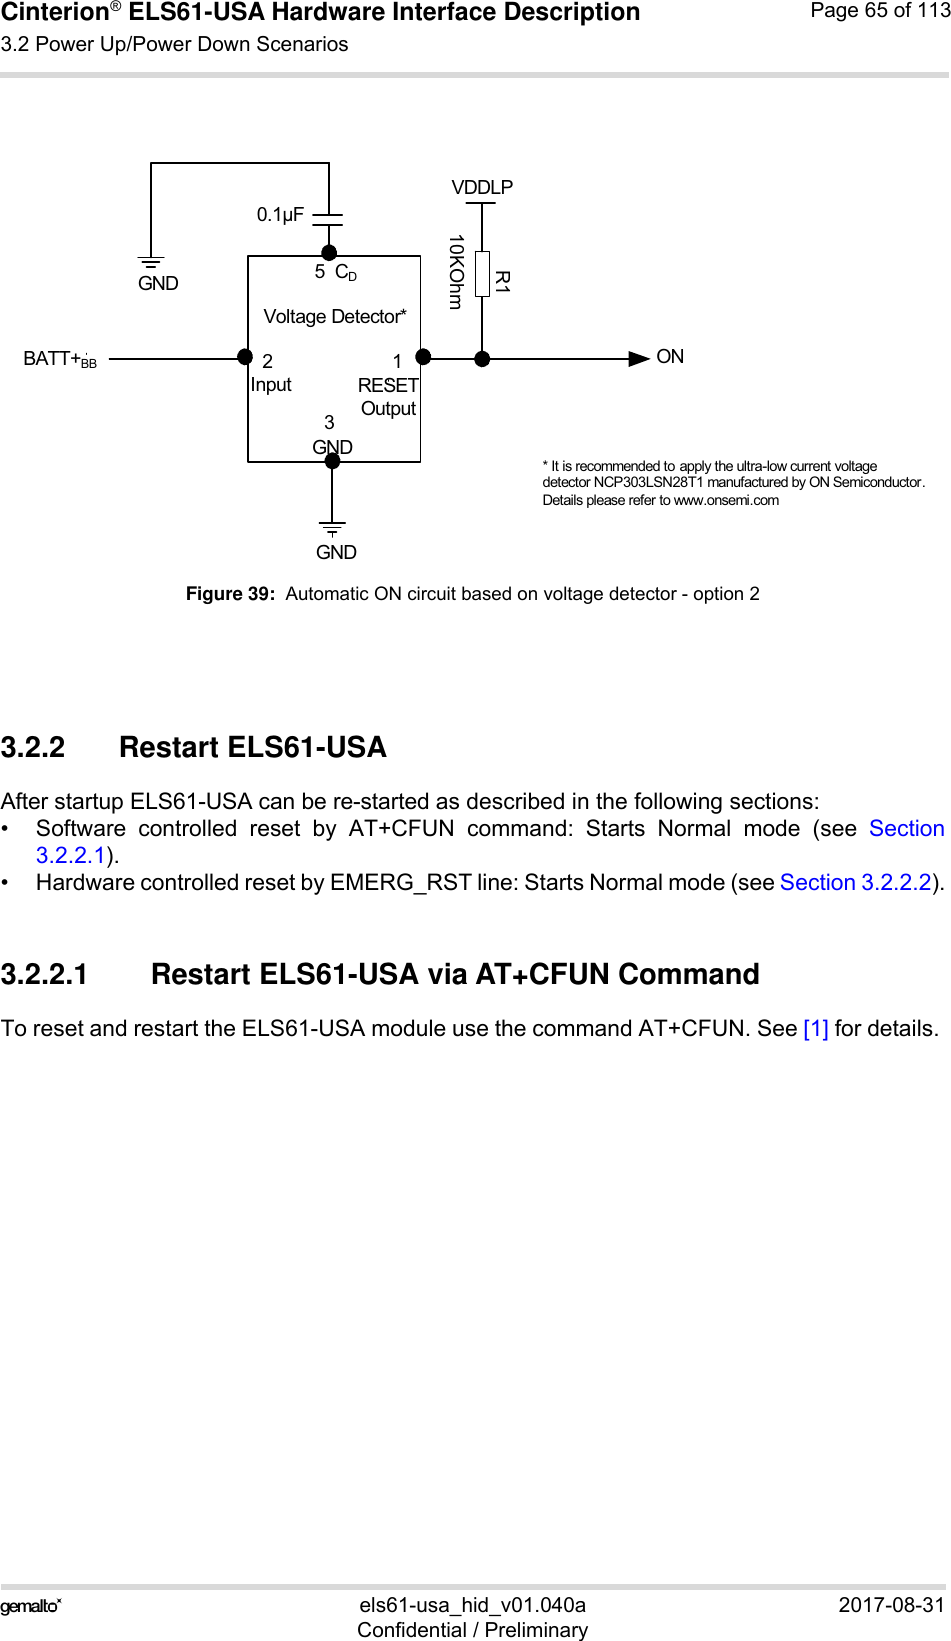 Cinterion® ELS61-USA Hardware Interface Description3.2 Power Up/Power Down Scenarios83els61-usa_hid_v01.040a 2017-08-31Confidential / PreliminaryPage 65 of 113Figure 39:  Automatic ON circuit based on voltage detector - option 23.2.2 Restart ELS61-USA After startup ELS61-USA can be re-started as described in the following sections:• Software controlled reset by AT+CFUN command: Starts Normal mode (see Section3.2.2.1).• Hardware controlled reset by EMERG_RST line: Starts Normal mode (see Section 3.2.2.2).3.2.2.1 Restart ELS61-USA via AT+CFUN CommandTo reset and restart the ELS61-USA module use the command AT+CFUN. See [1] for details. Voltage Detector*BATT+BBGNDONVDDLP* It is recommended to apply the ultra-low current voltage detector NCP303LSN28T1 manufactured by ON Semiconductor. Details please refer to www.onsemi.comInput RESETOutputGNDR110KOhm2130.1μFGND 5  CD